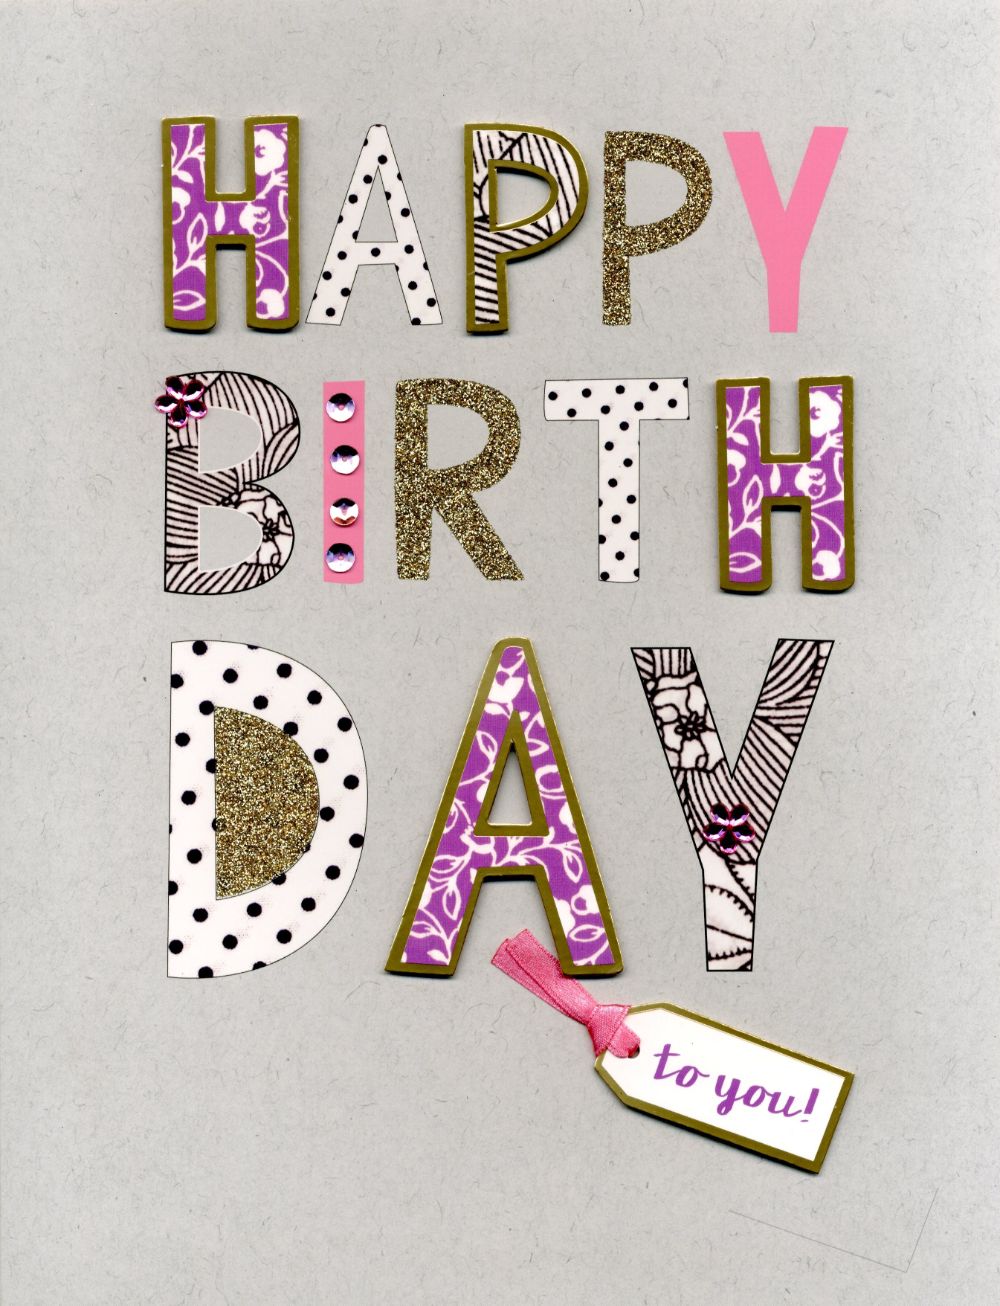 Happy Birthday To You! Gigantic A4 Embellished Greeting Card